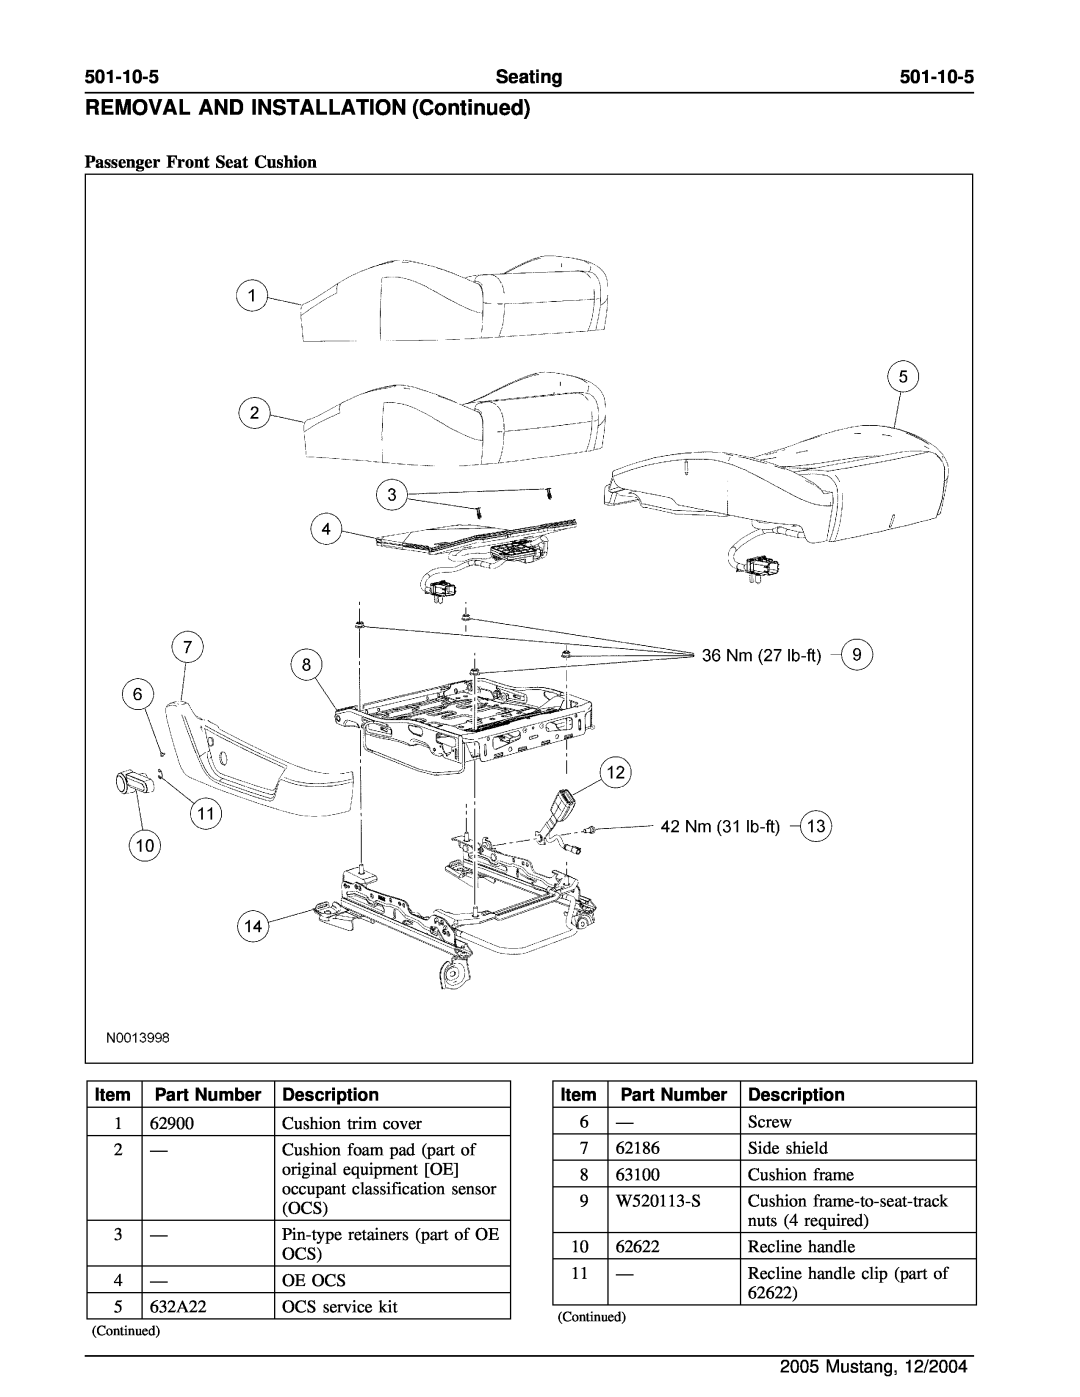 Ford 501-10-1 manual 501-10-5, Passenger Front Seat Cushion, REMOVAL AND INSTALLATION Continued, Seating, Part Number 